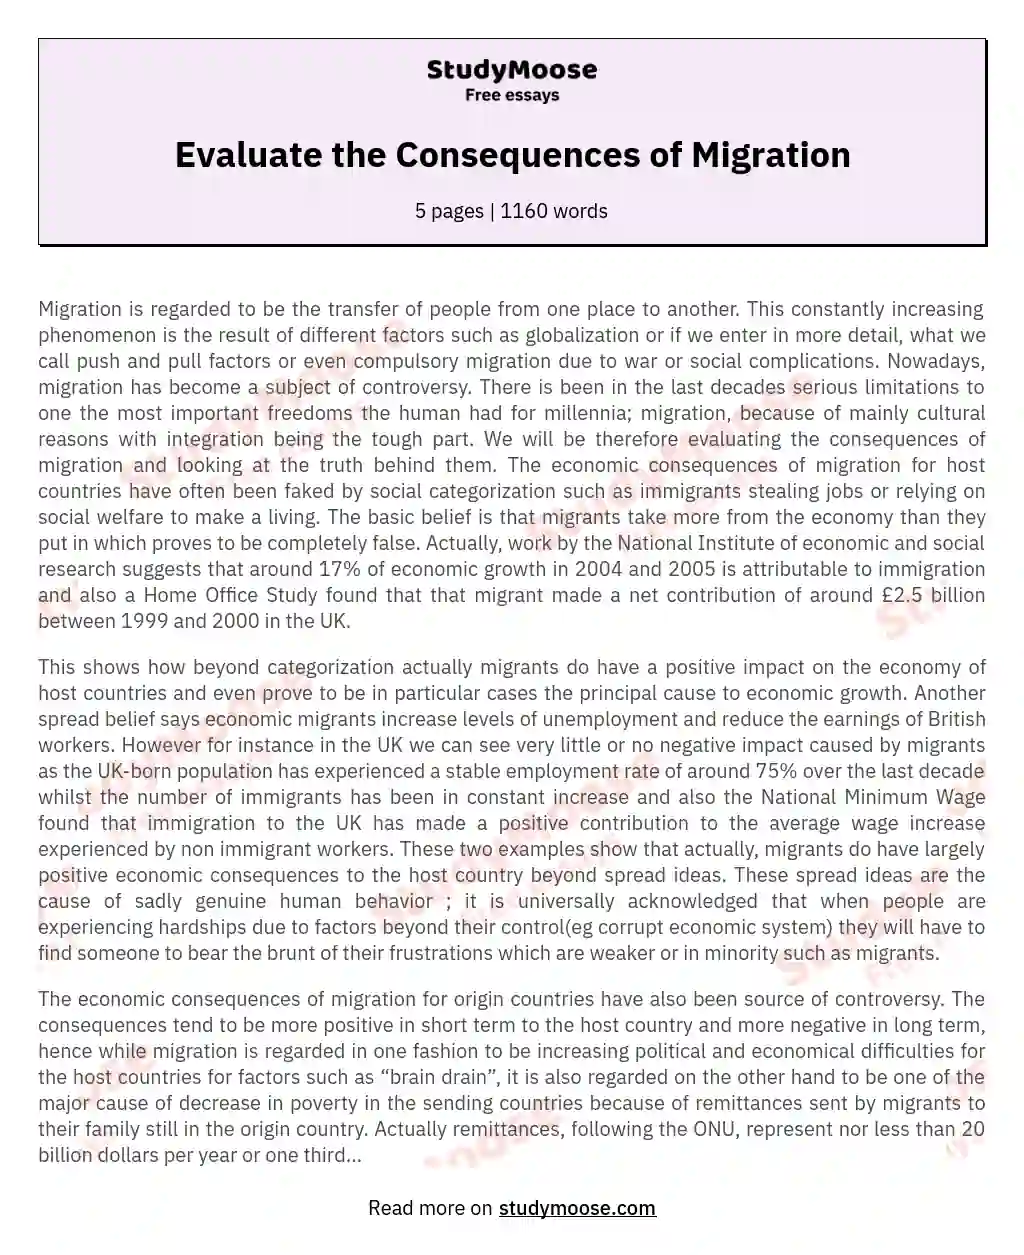 Evaluate the Consequences of Migration essay